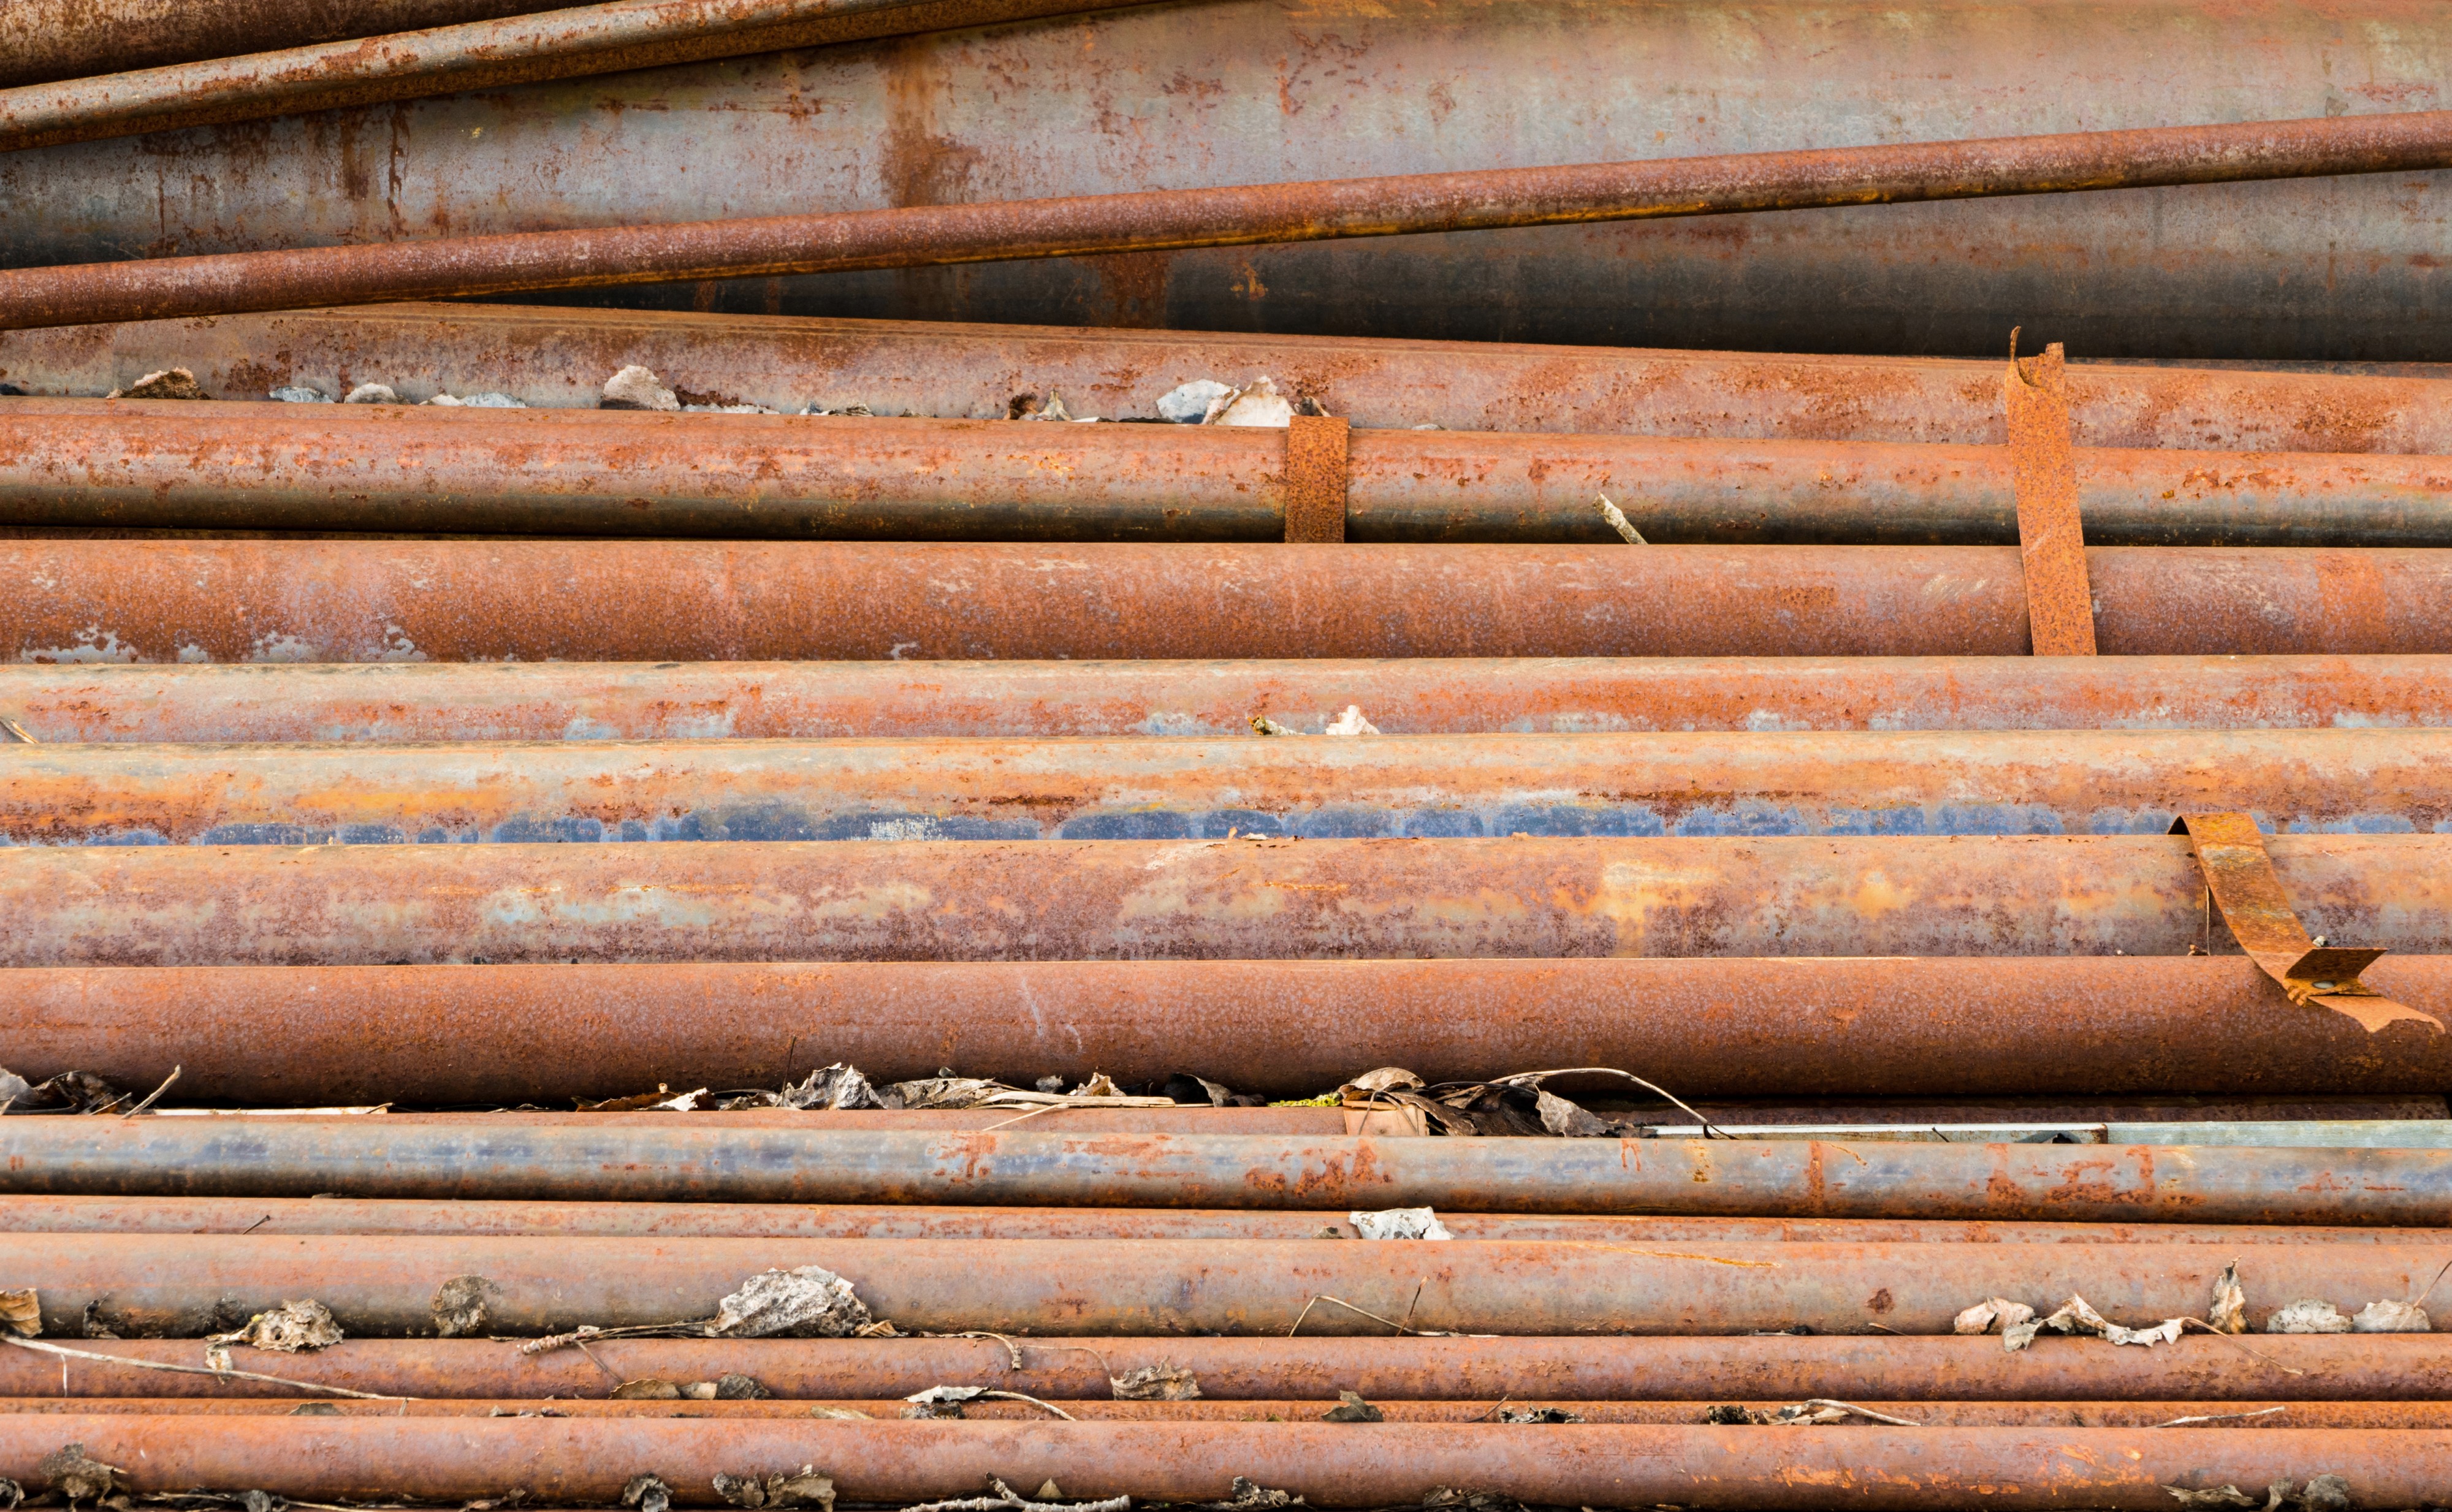 Assortment of rusty pipes 1